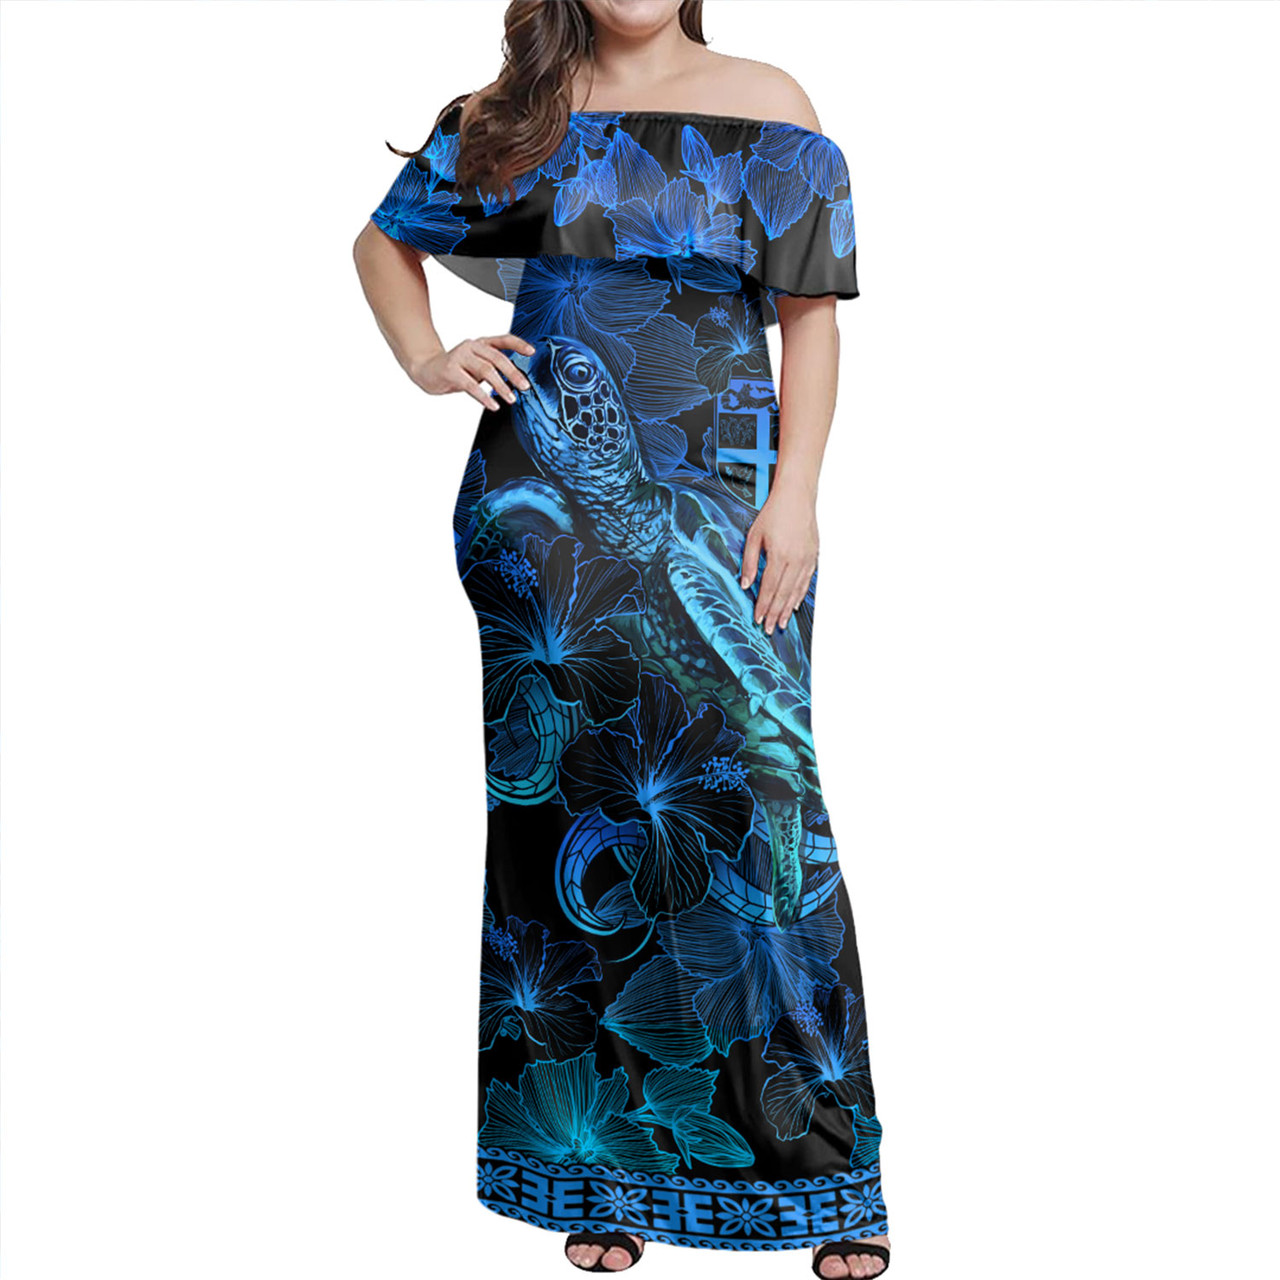 Fiji Combo Off Shoulder Long Dress And Shirt Sea Turtle With Blooming Hibiscus Flowers Tribal Blue